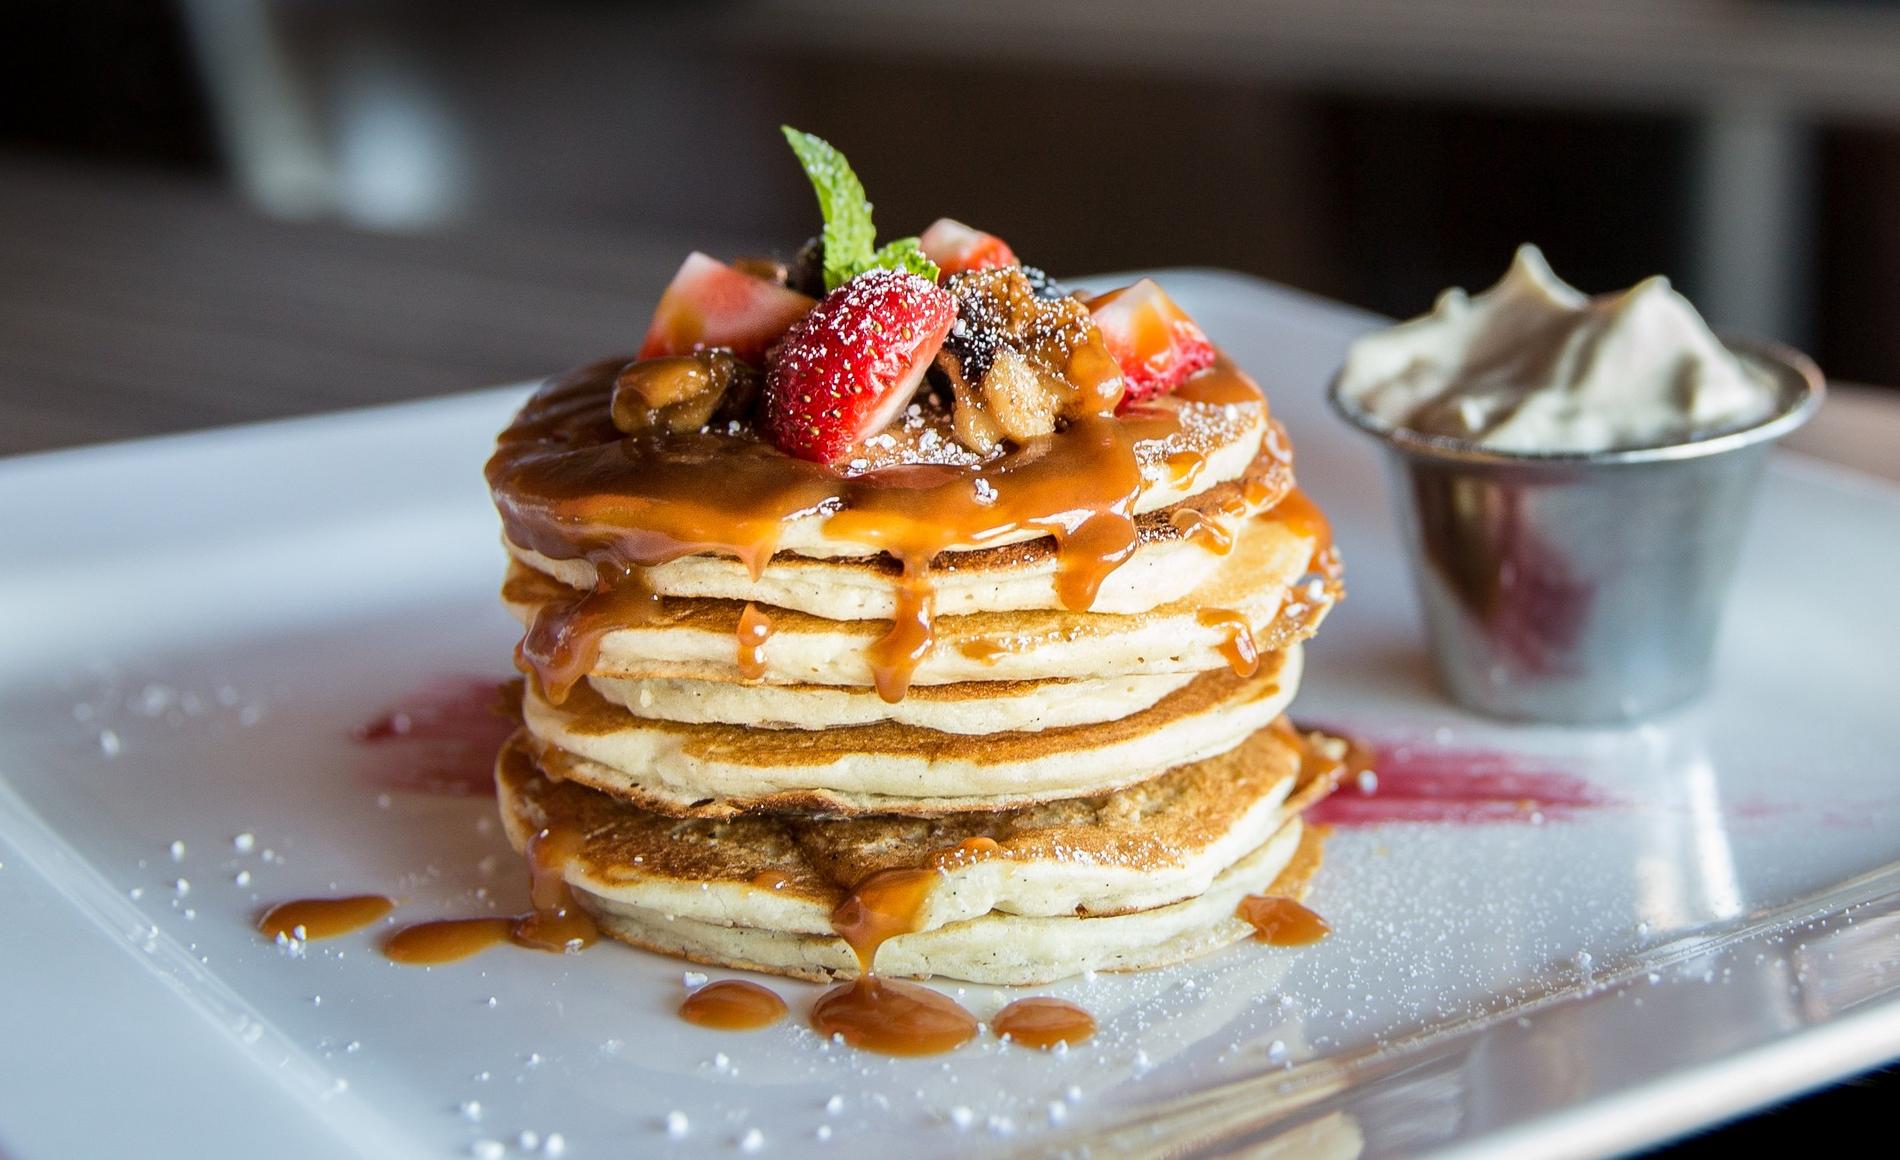 Where to Get the Best Pancakes in Your City